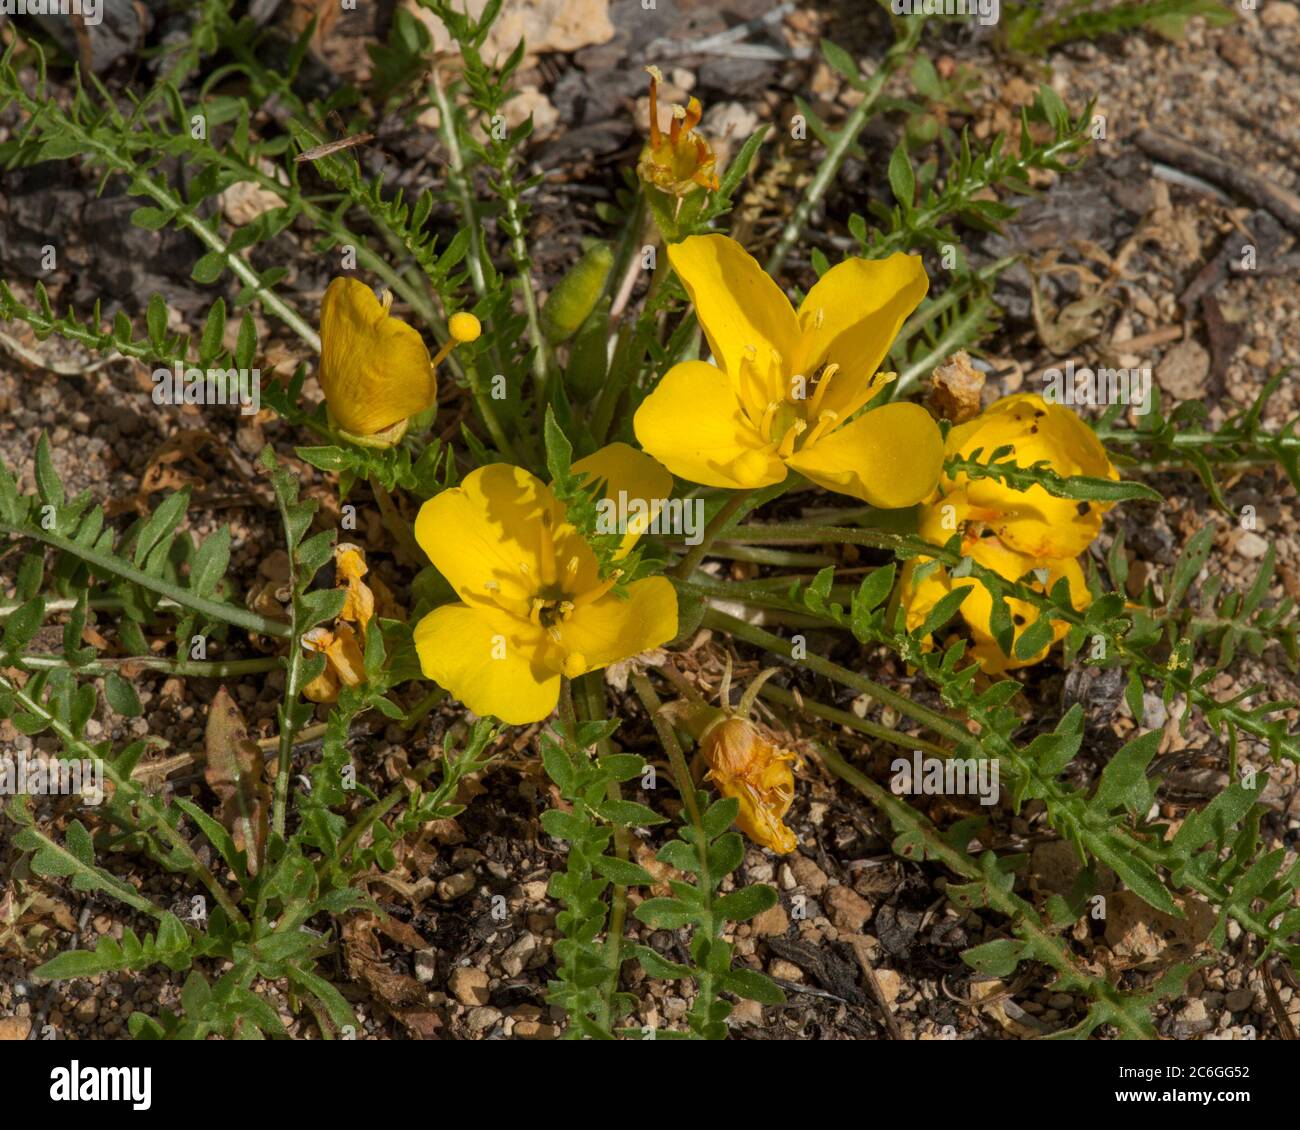 Tansy-Leaved Evening Primrose (Taraxia tanacetifolia, formerly known as Camissonia tanacetifolia) also called Suncups, found growing on the shore of W Stock Photo